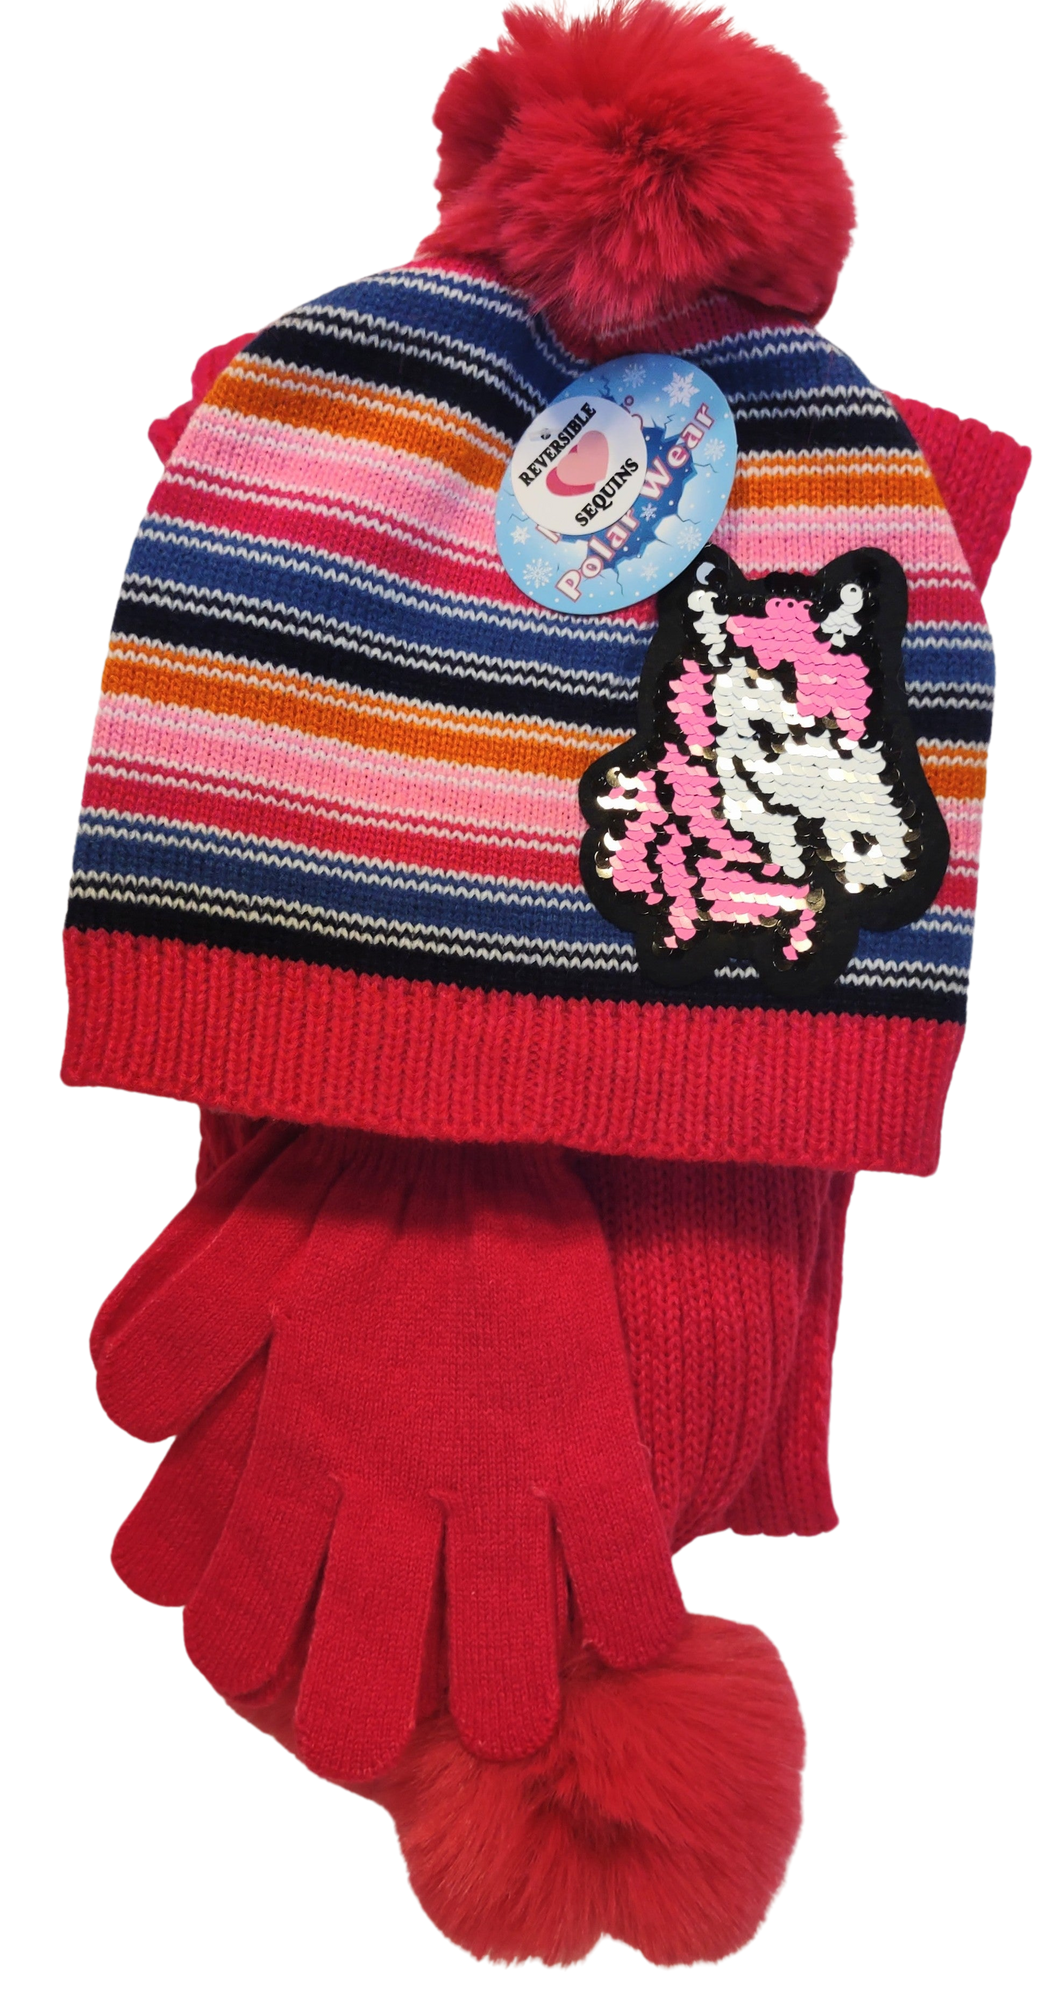 Girl's 3 Piece Unicorn Stripe Hat, Glove & Scarf Set - Assorted Colors, Youth Size